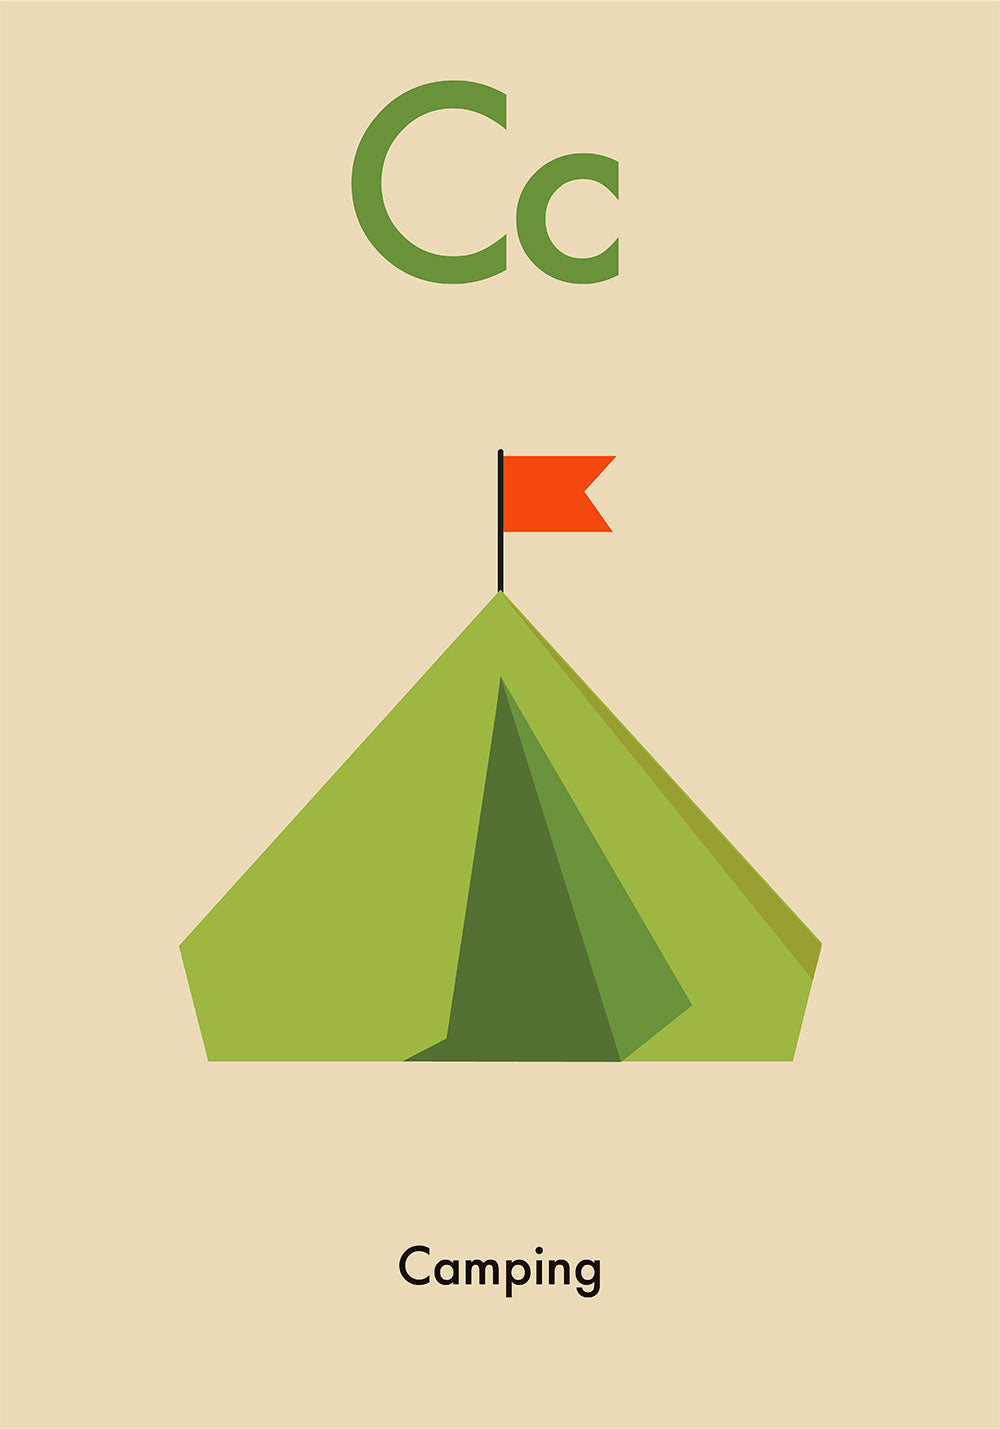 C for Camping - Children's Alphabet Poster in German and English